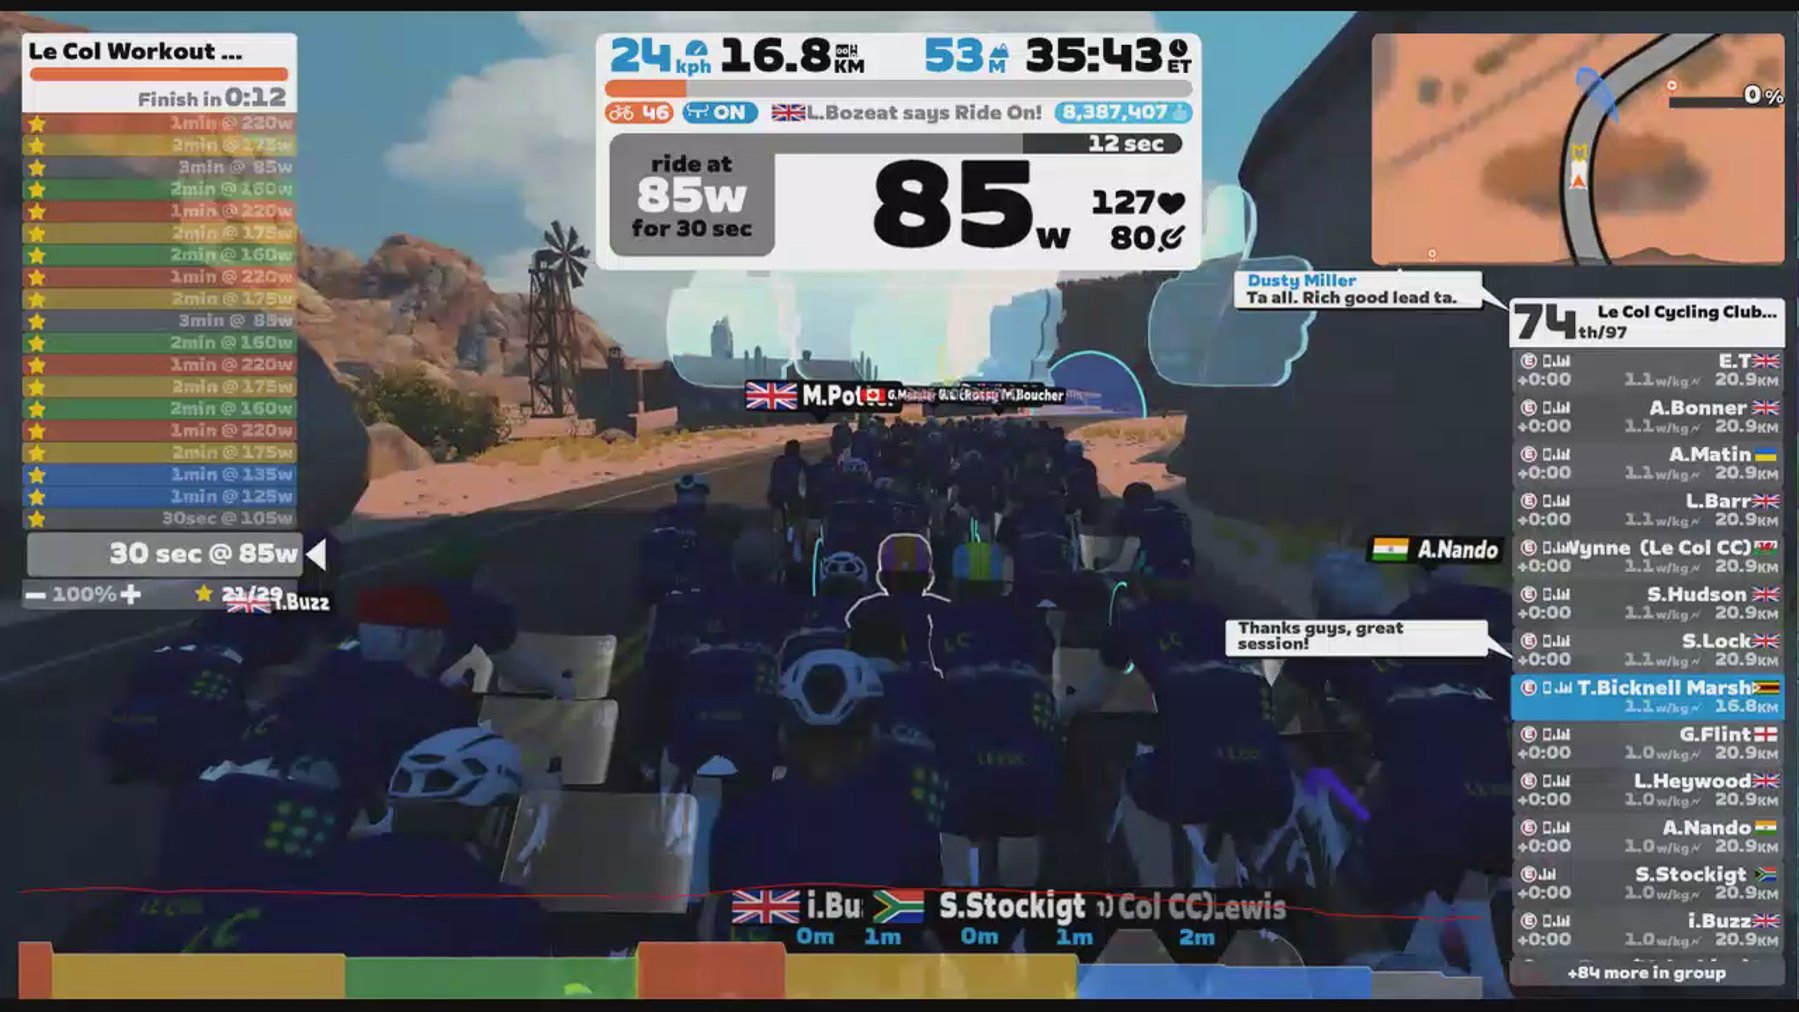 Zwift - Group Workout: Le Col Cycling Club Community Sessions (E) on Tick Tock in Watopia